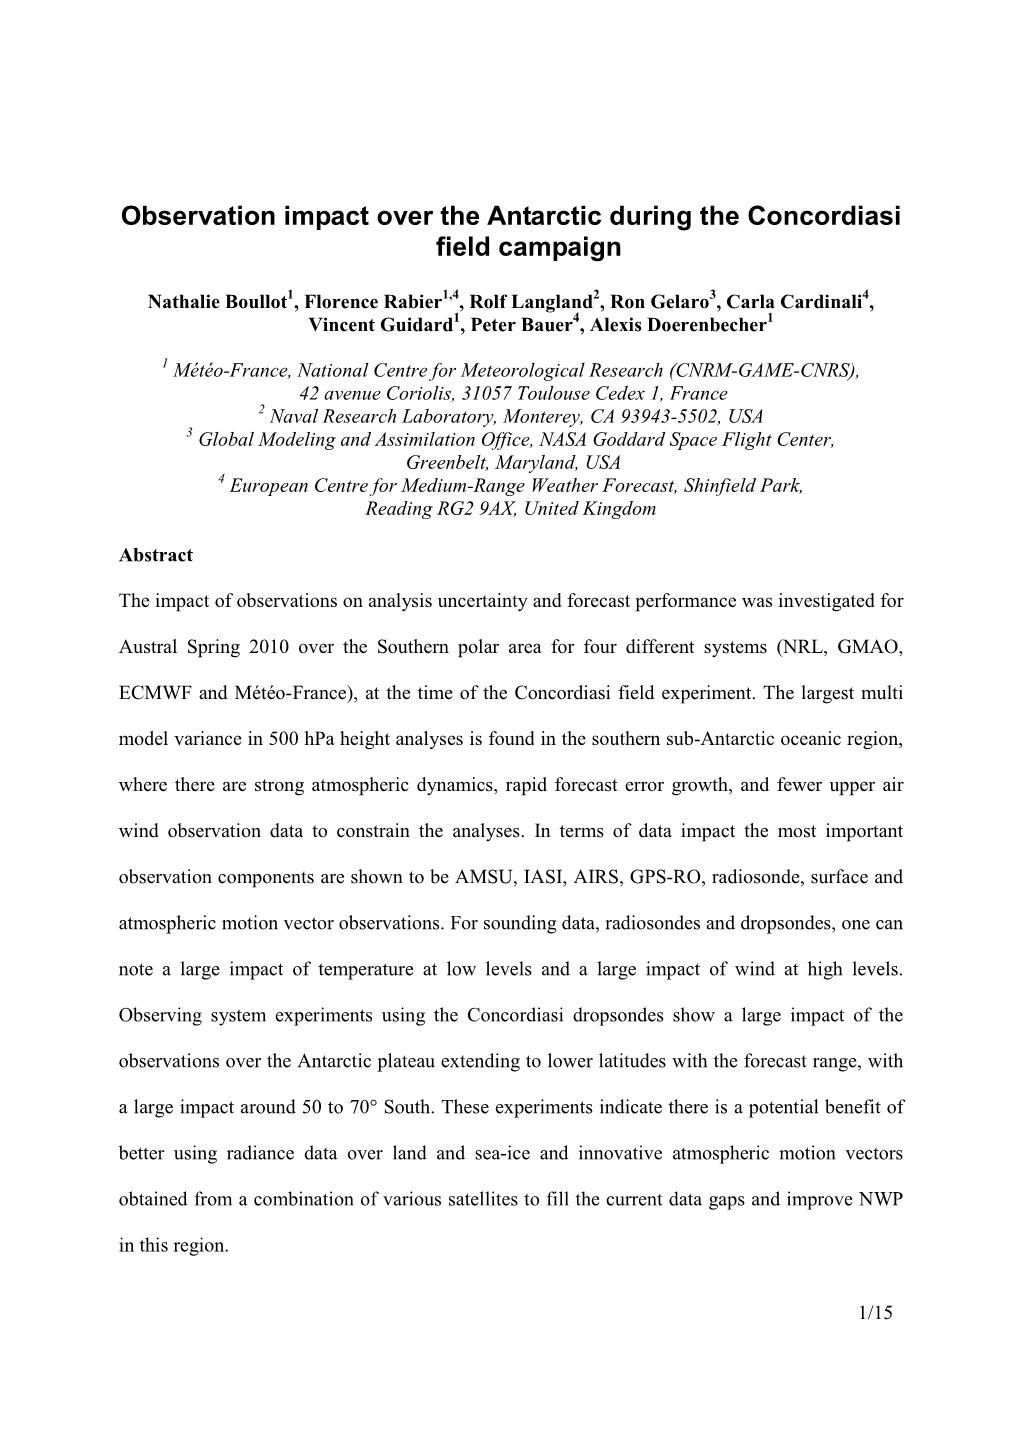 Observation Impact Over the Antarctic During the Concordiasi Field Campaign